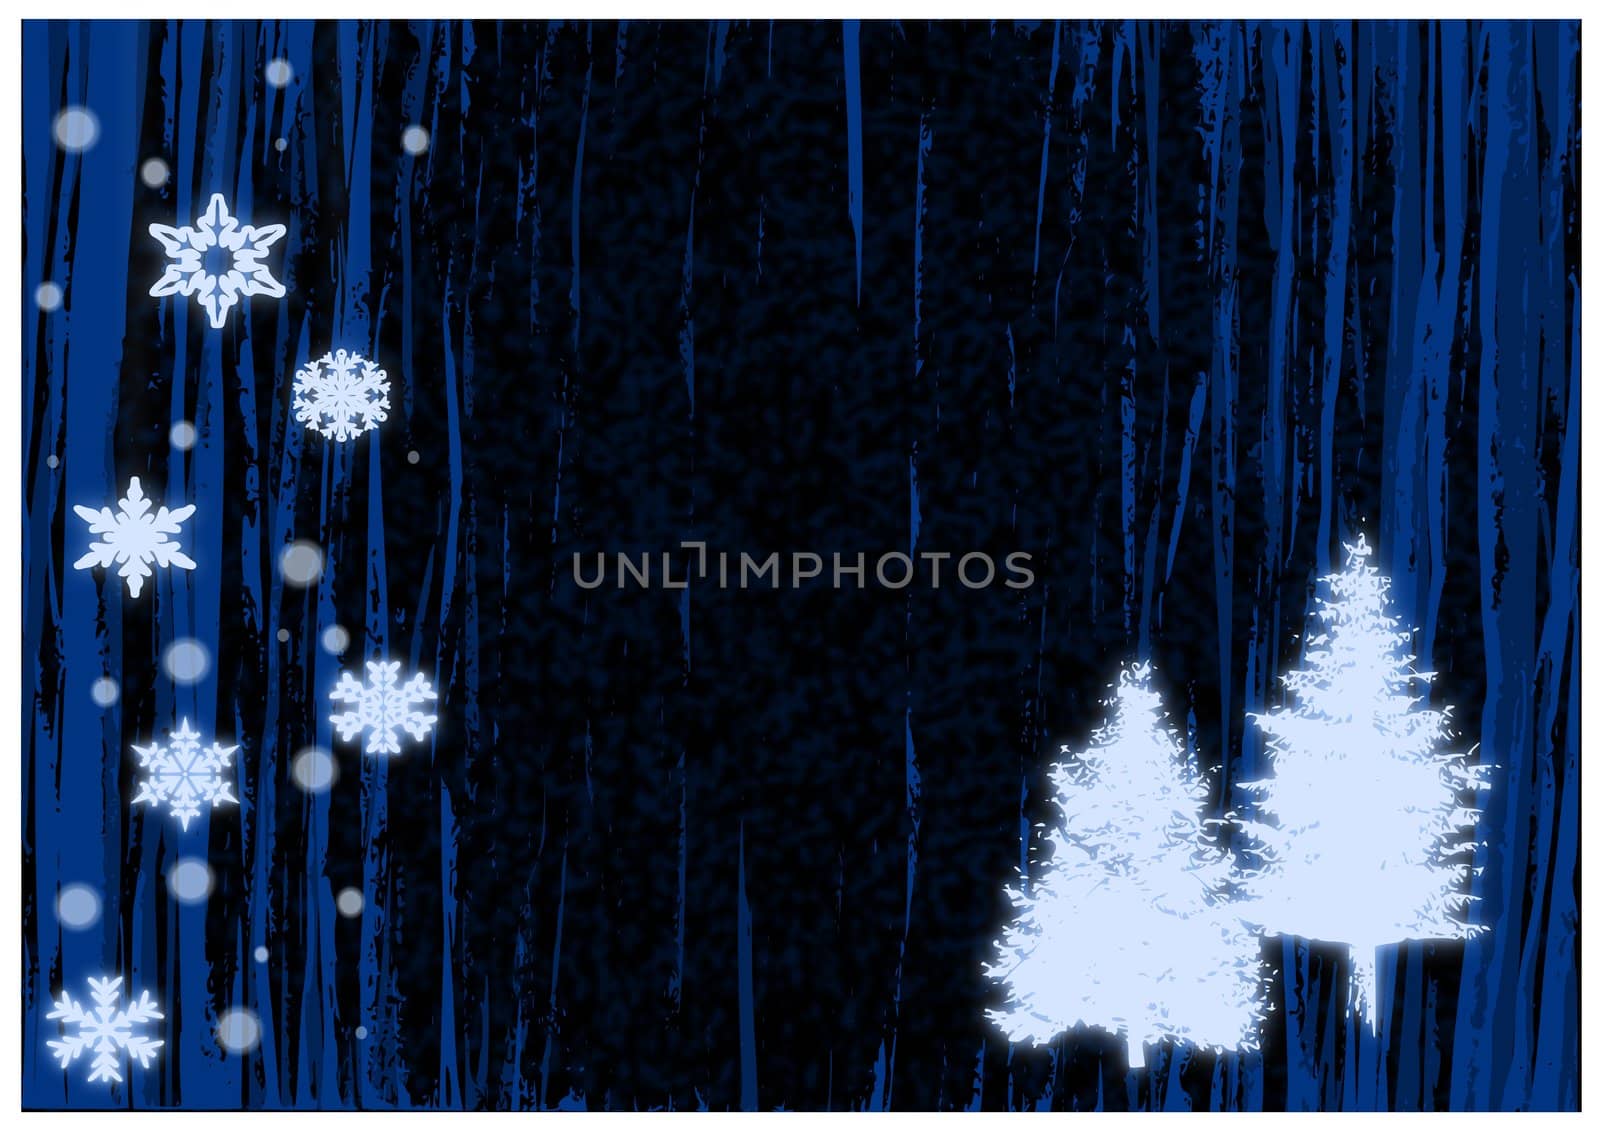 Christmas illustration of glowing blue snowflakes and trees.